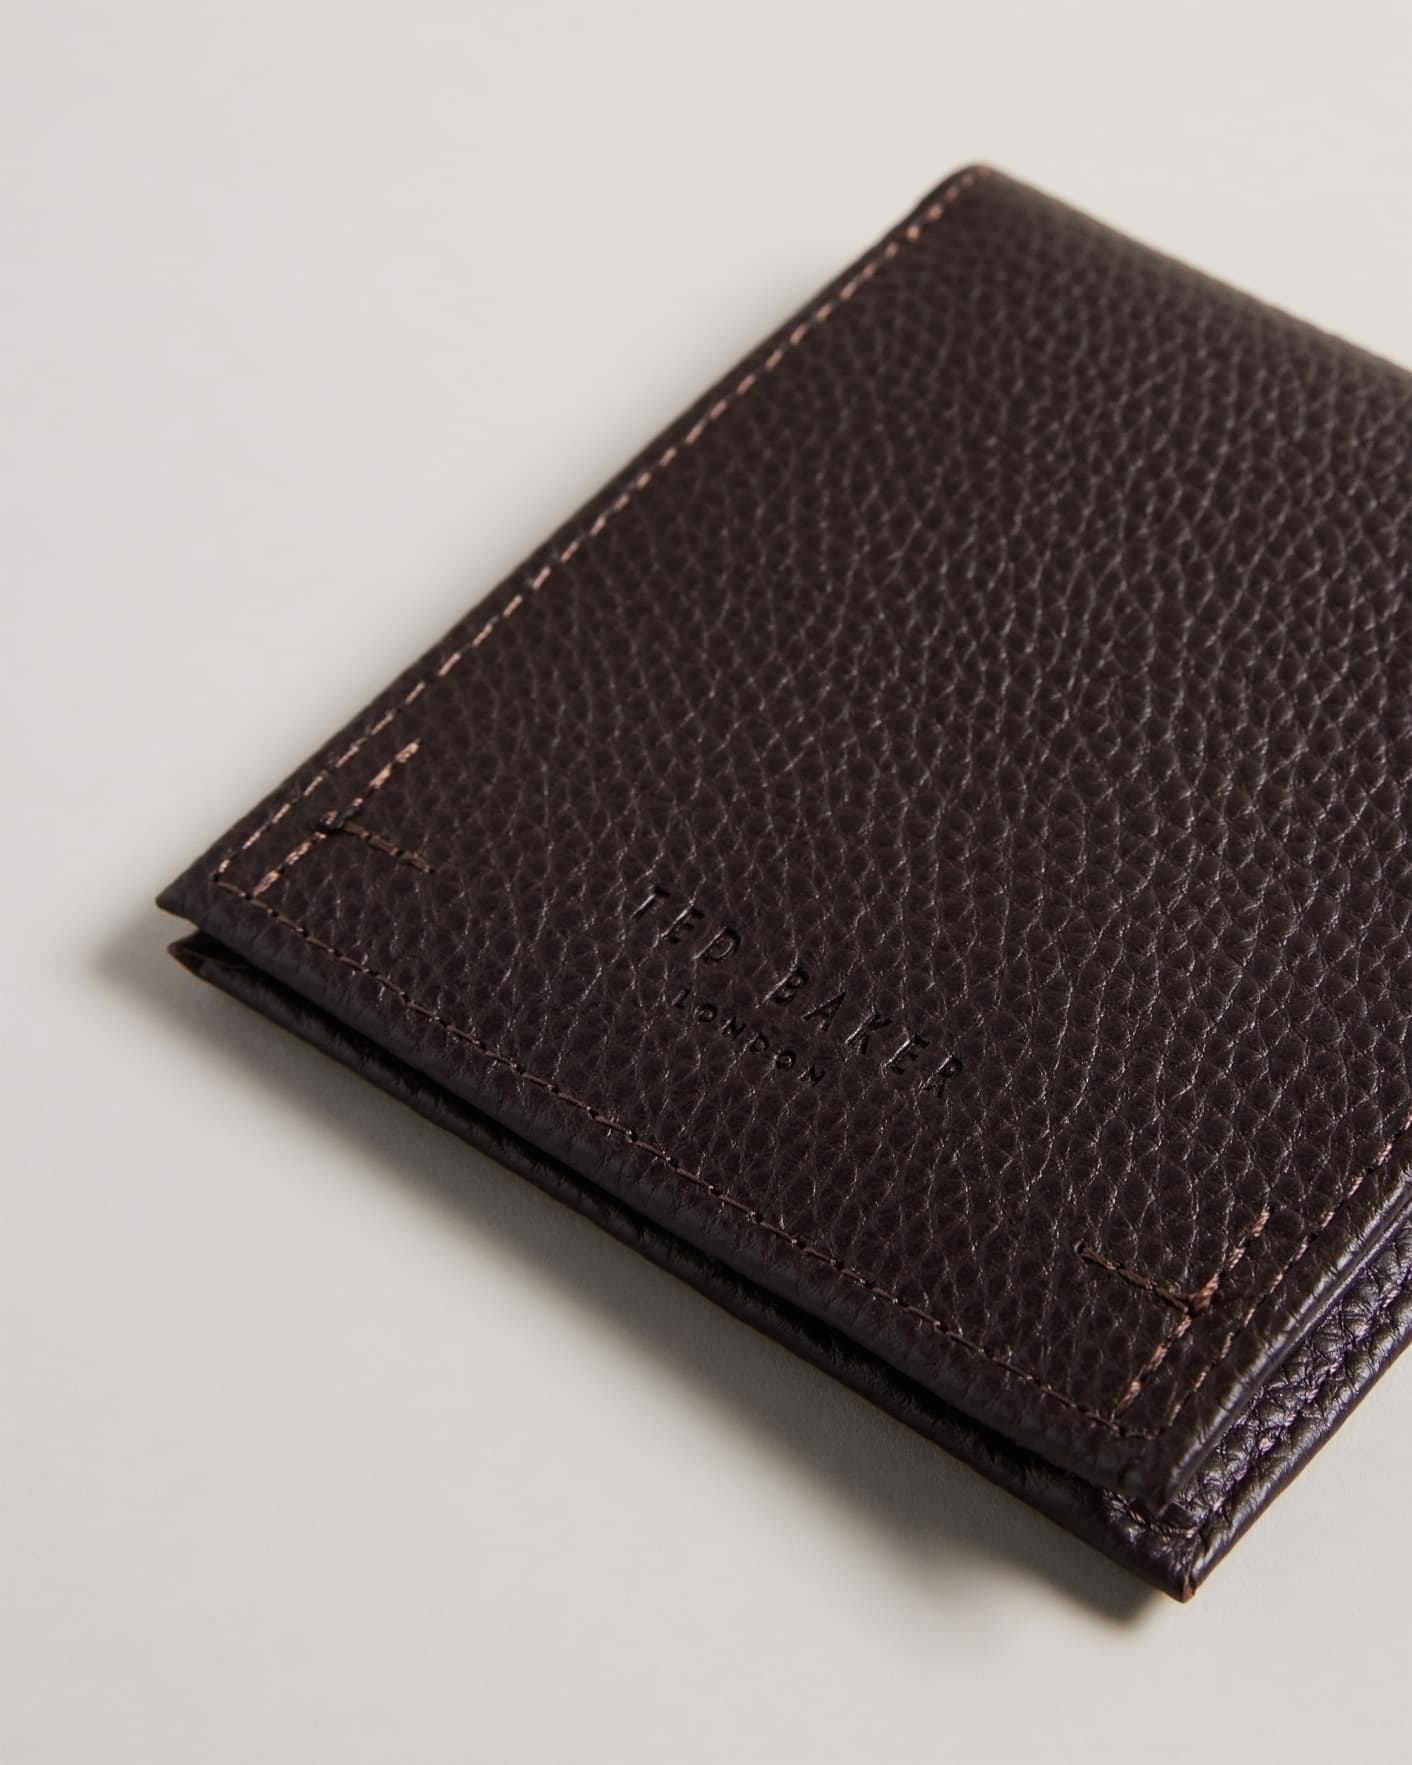 BRN-CHOC Leather Bifold Wallet Ted Baker